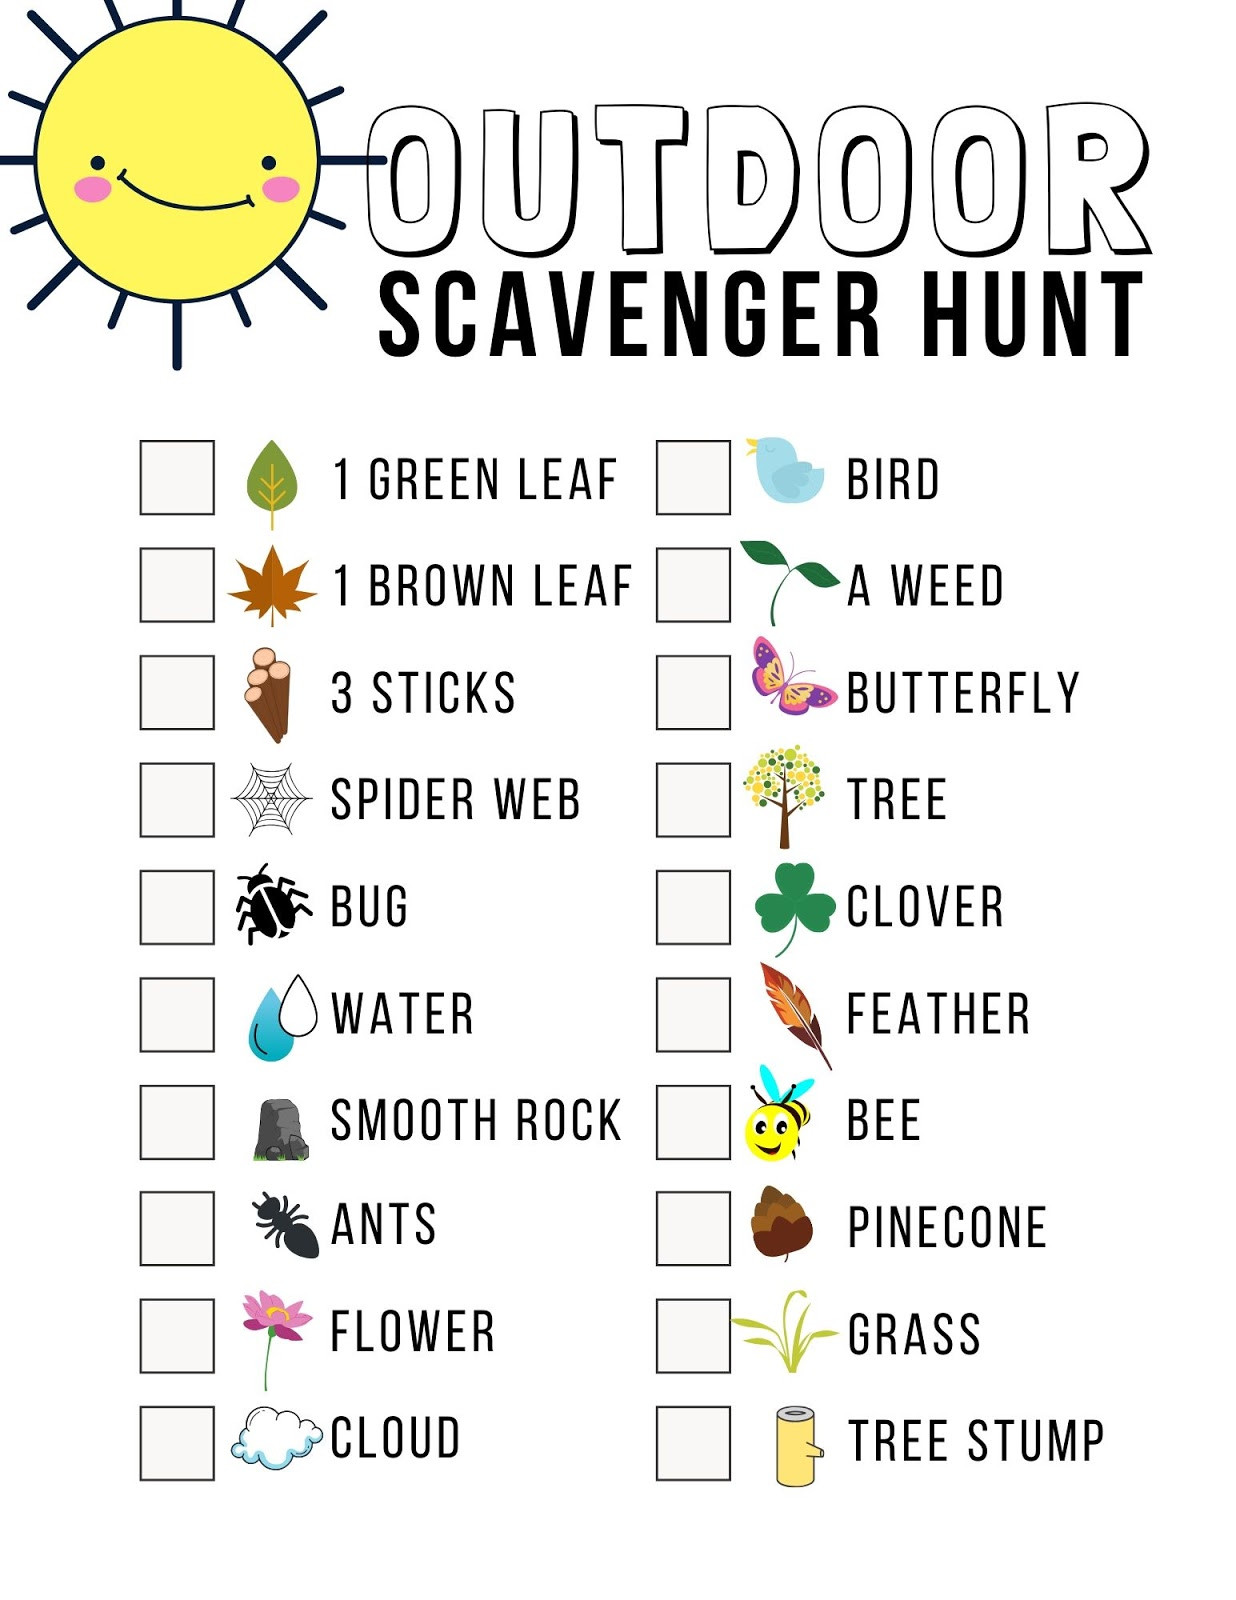 Outdoor Scavenger Hunt For Kids
 10 of the Best Scavenger Hunt Ideas for Family Fun with